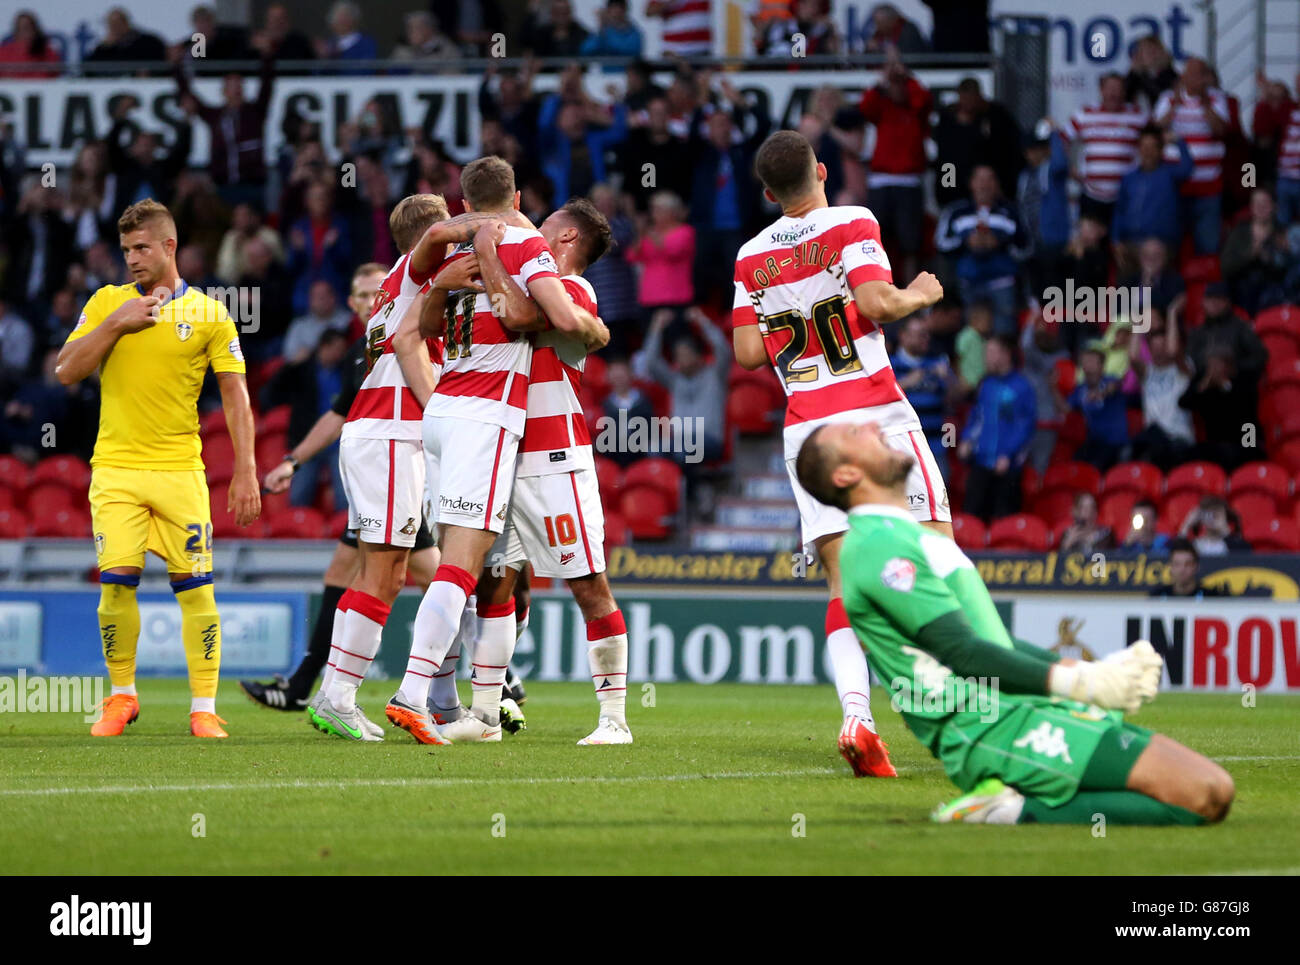 Soccer - Capital One Cup - First Round - Doncaster Rovers v Leeds United - Keepmoat Stadium. Doncaster Rovers' Andy Williams (back to camera) celebrates scoring his side's first goal of the game Stock Photo